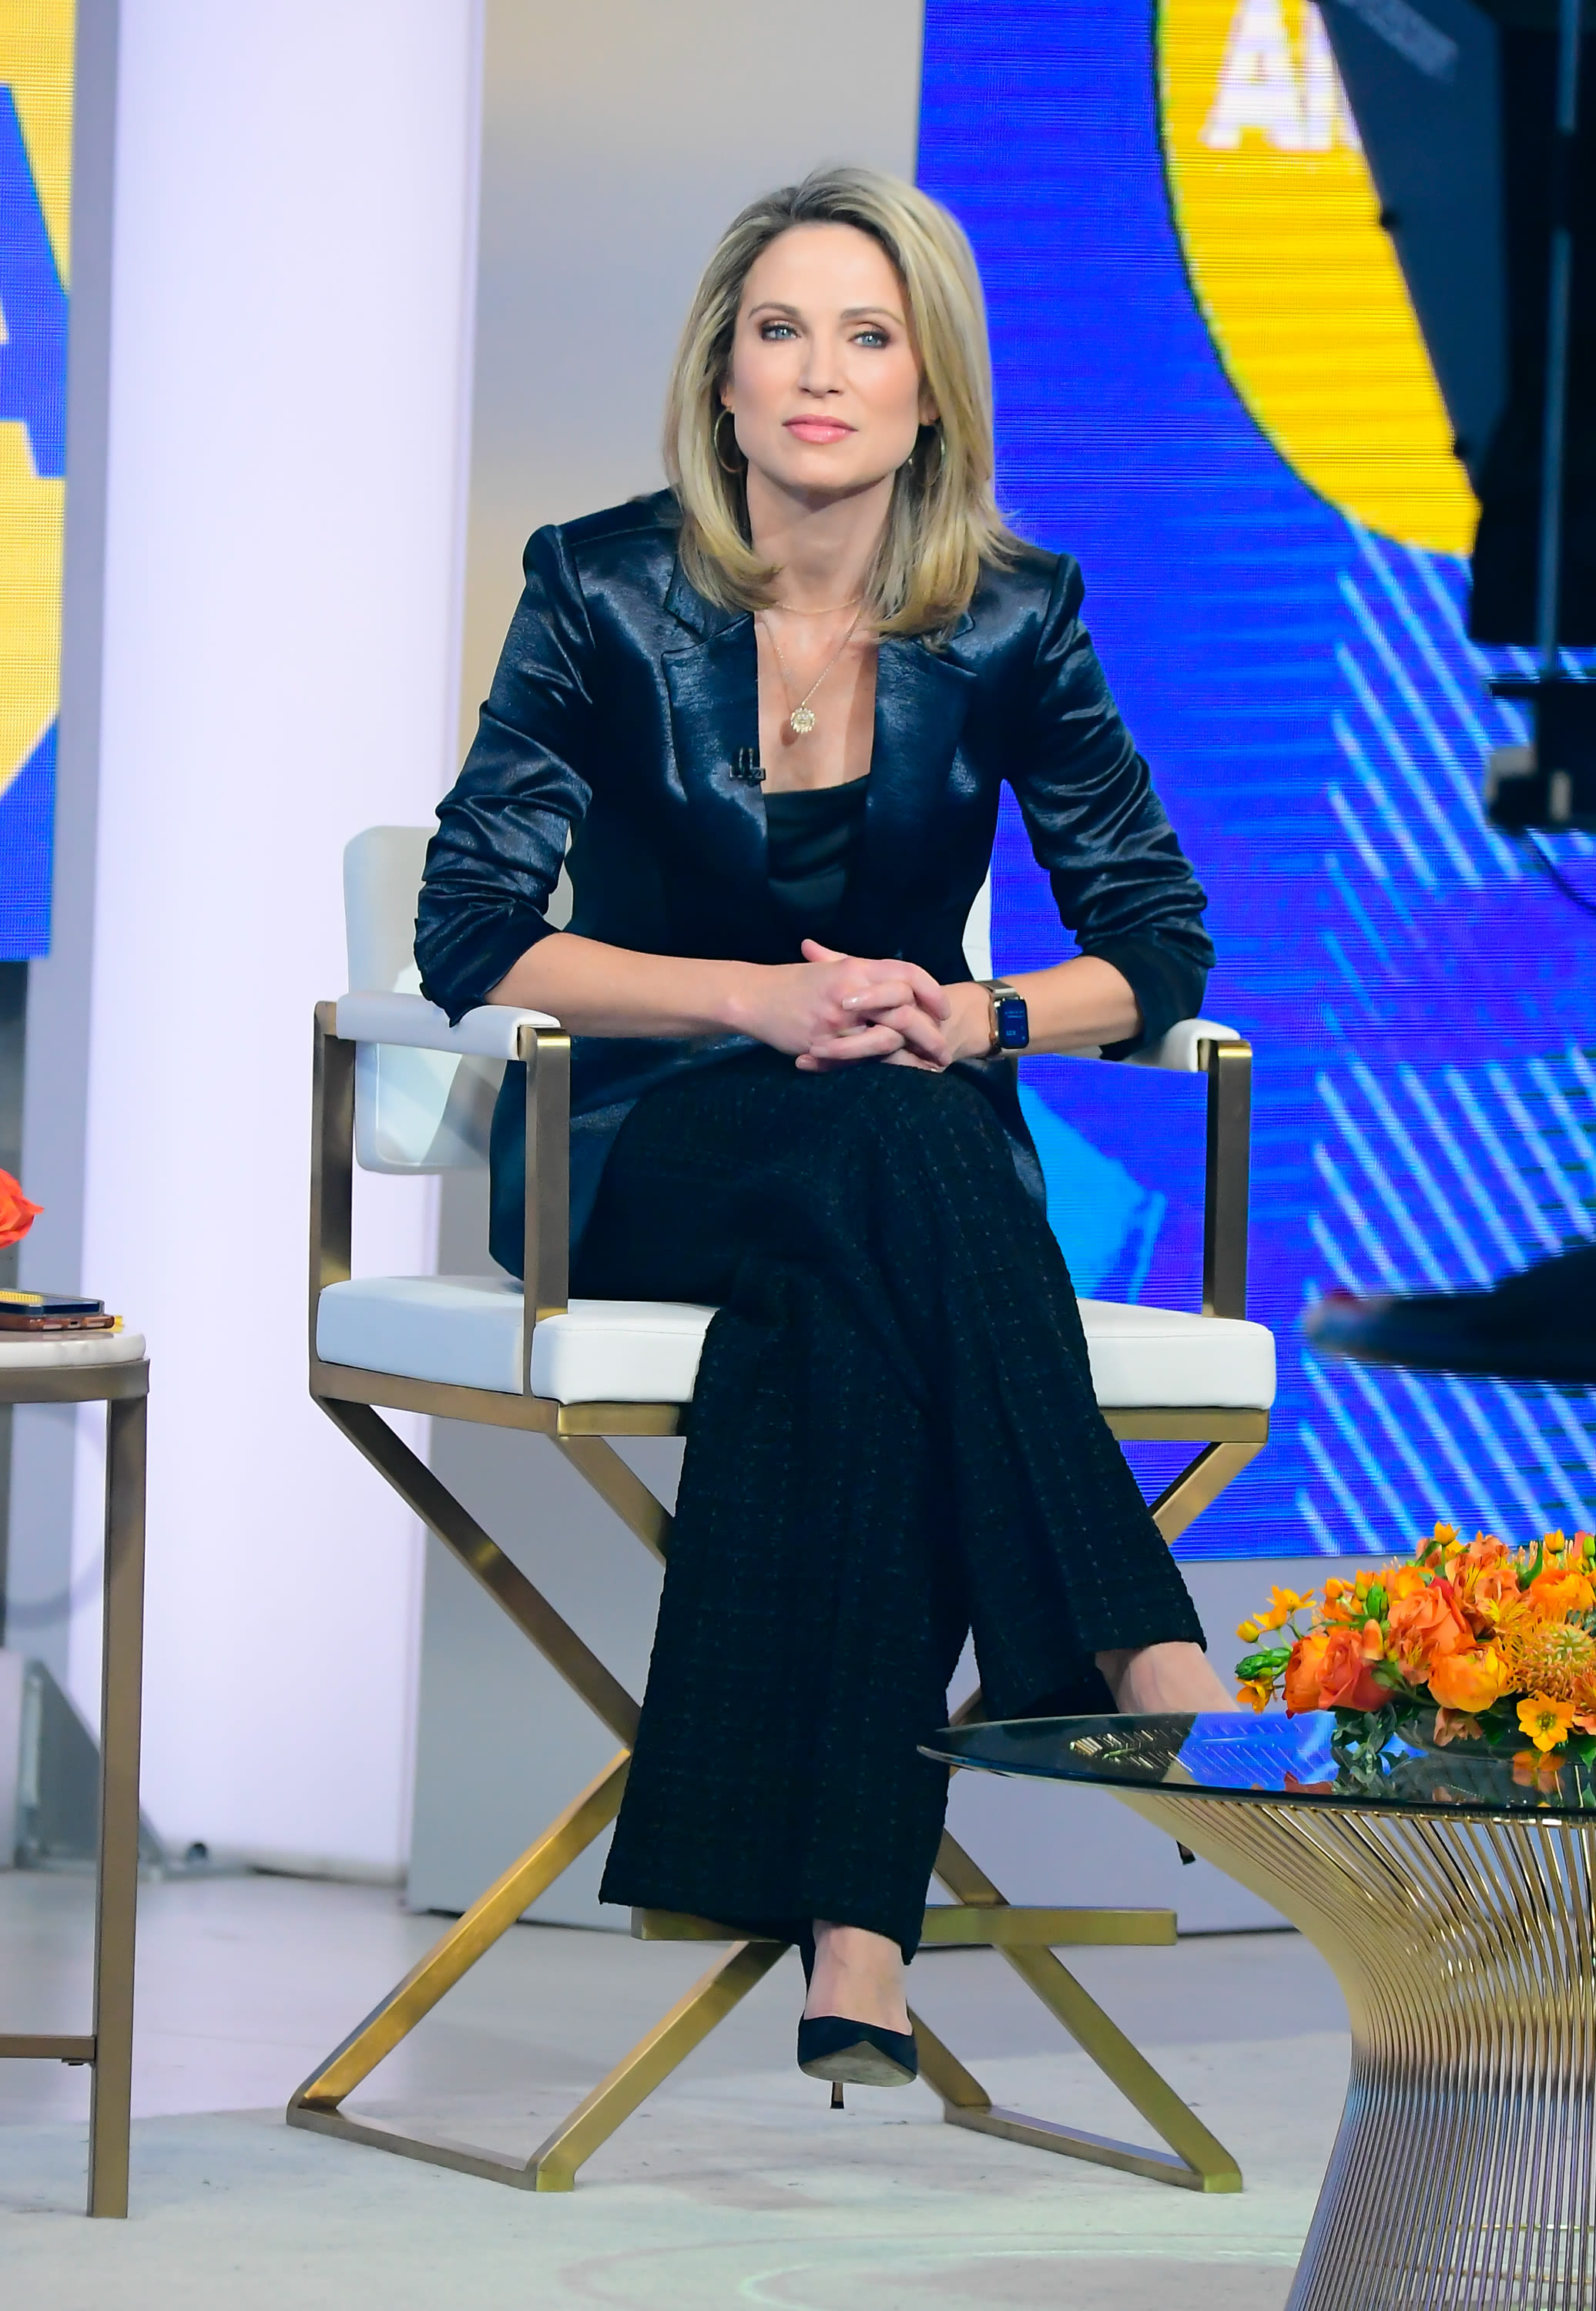 Former ‘GMA 3’ Host Amy Robach Is ‘Lobbying Hard for Her Return’ Say Sources